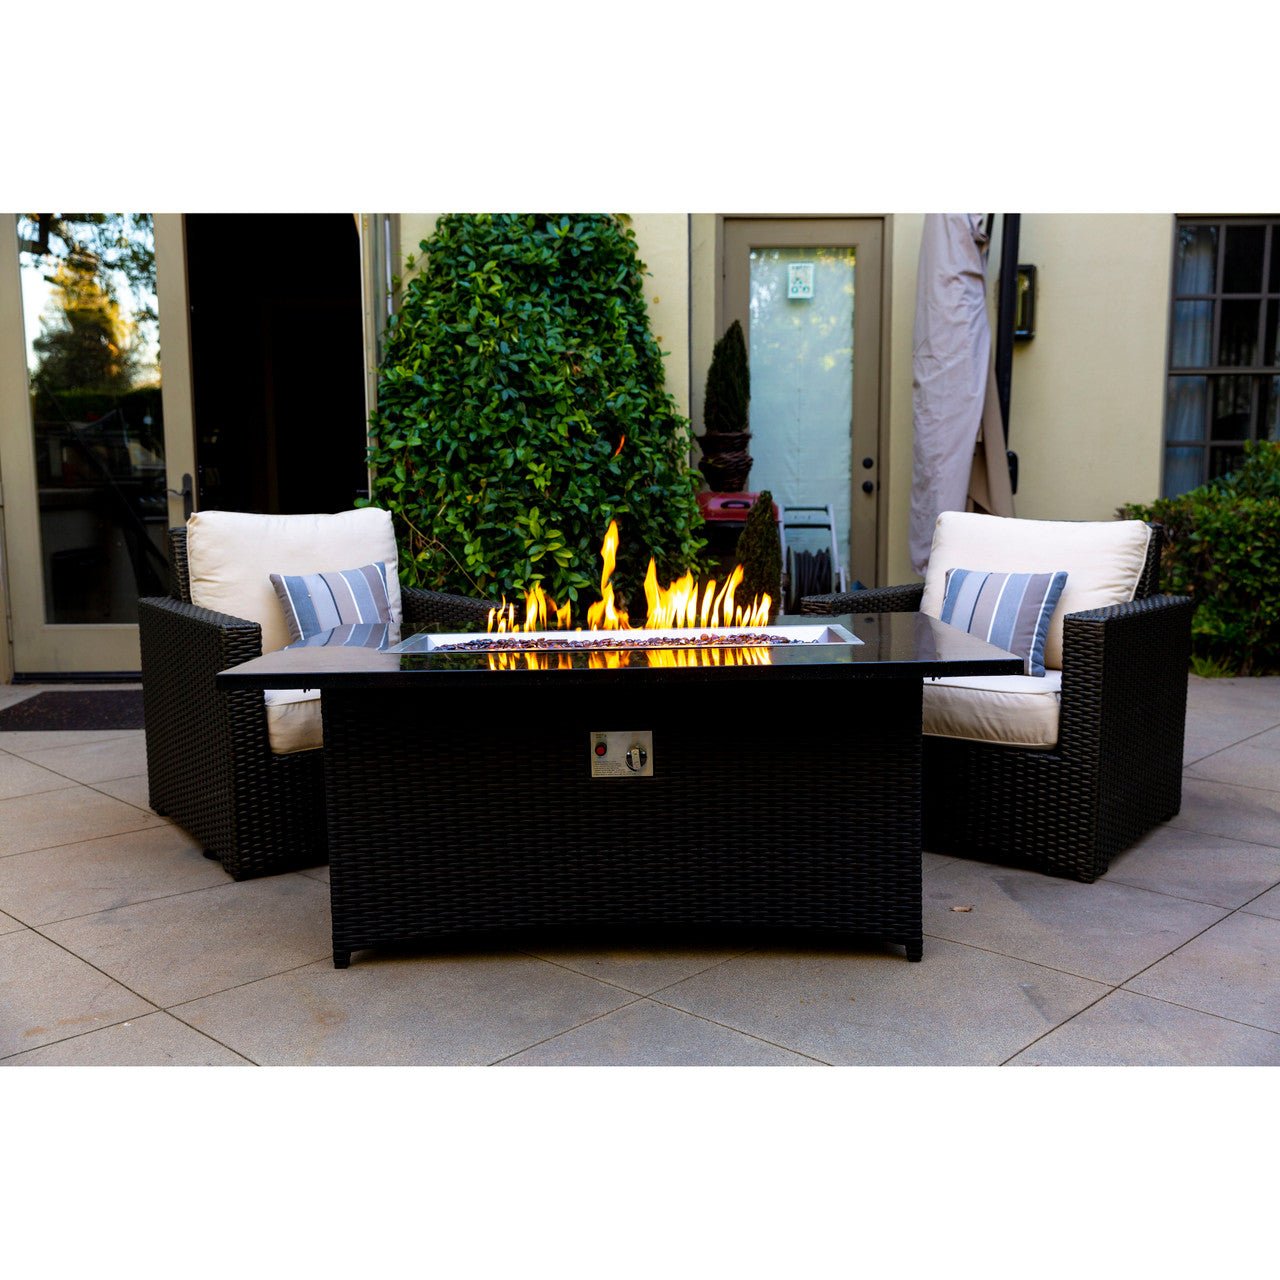 -58 in. Rectangular Steel Gas Fire Pit with Burner and Table Lid - Outdoor Style Company